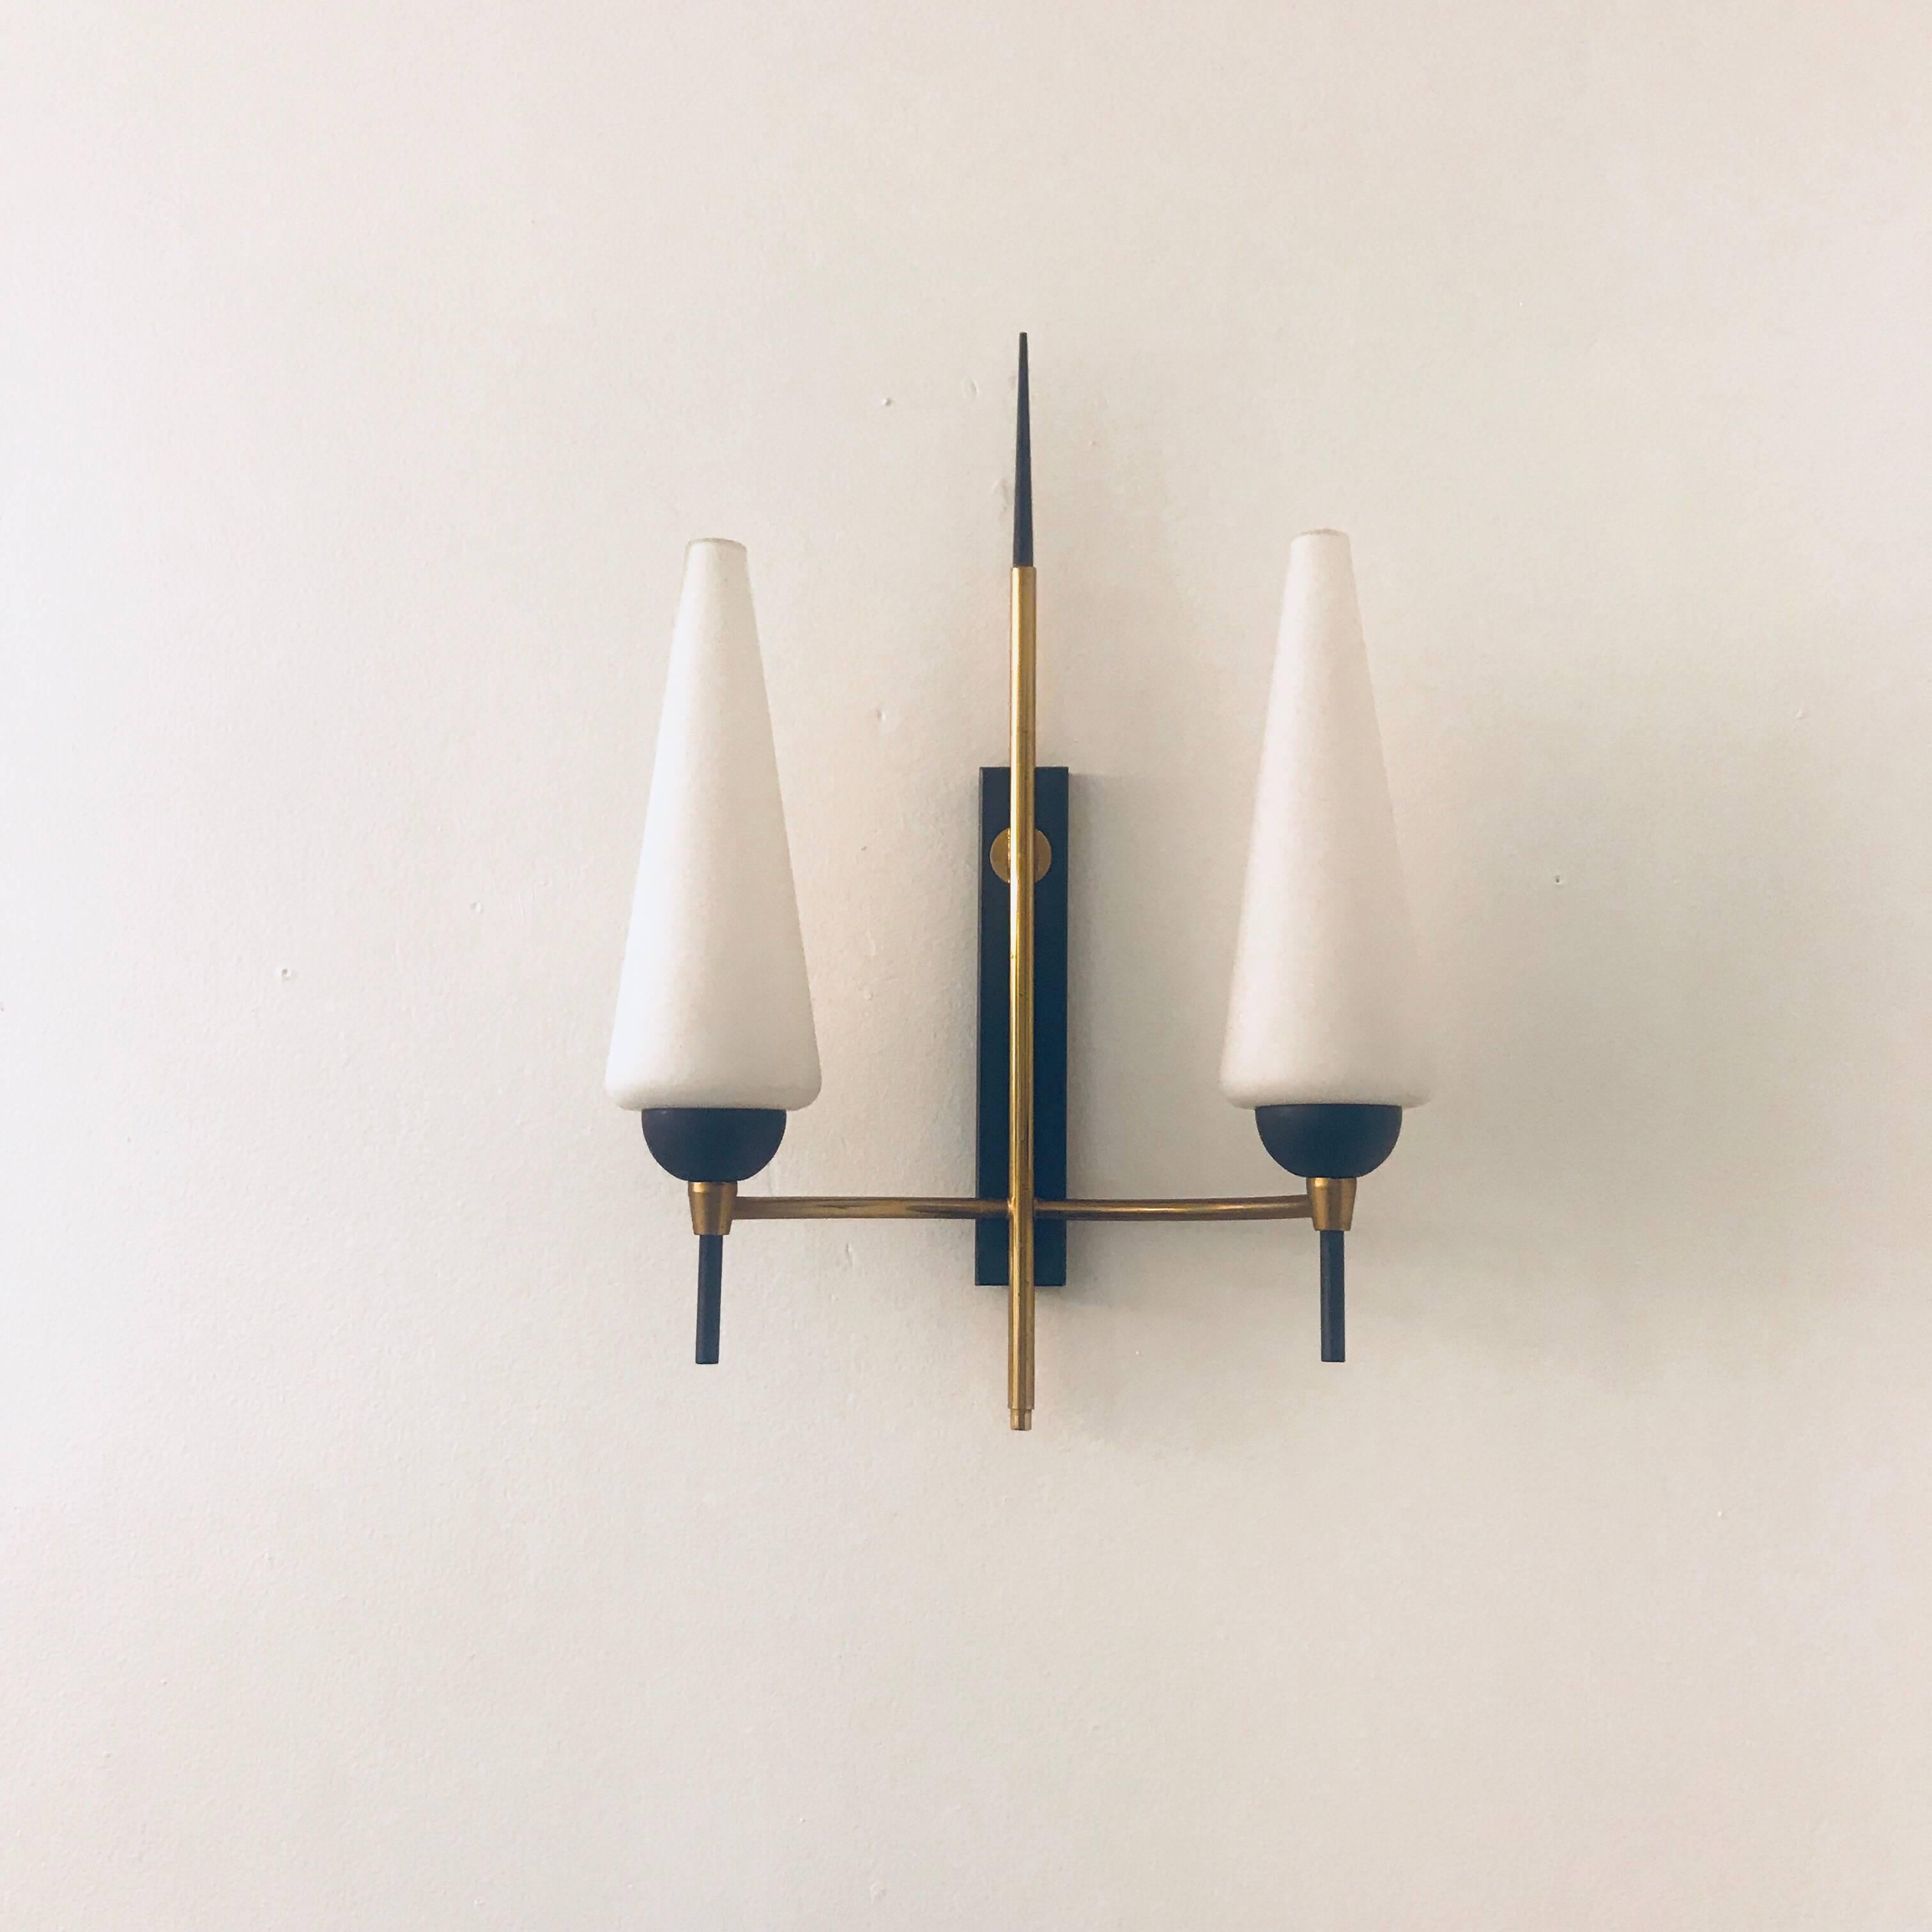 A set of two 1960s French wall lights composed of golden brass and black enamel frames holding white cone glass shades. Newly rewired with matching backplates. 120 Watts each . The sconces are by the French lighting company, Lunel.